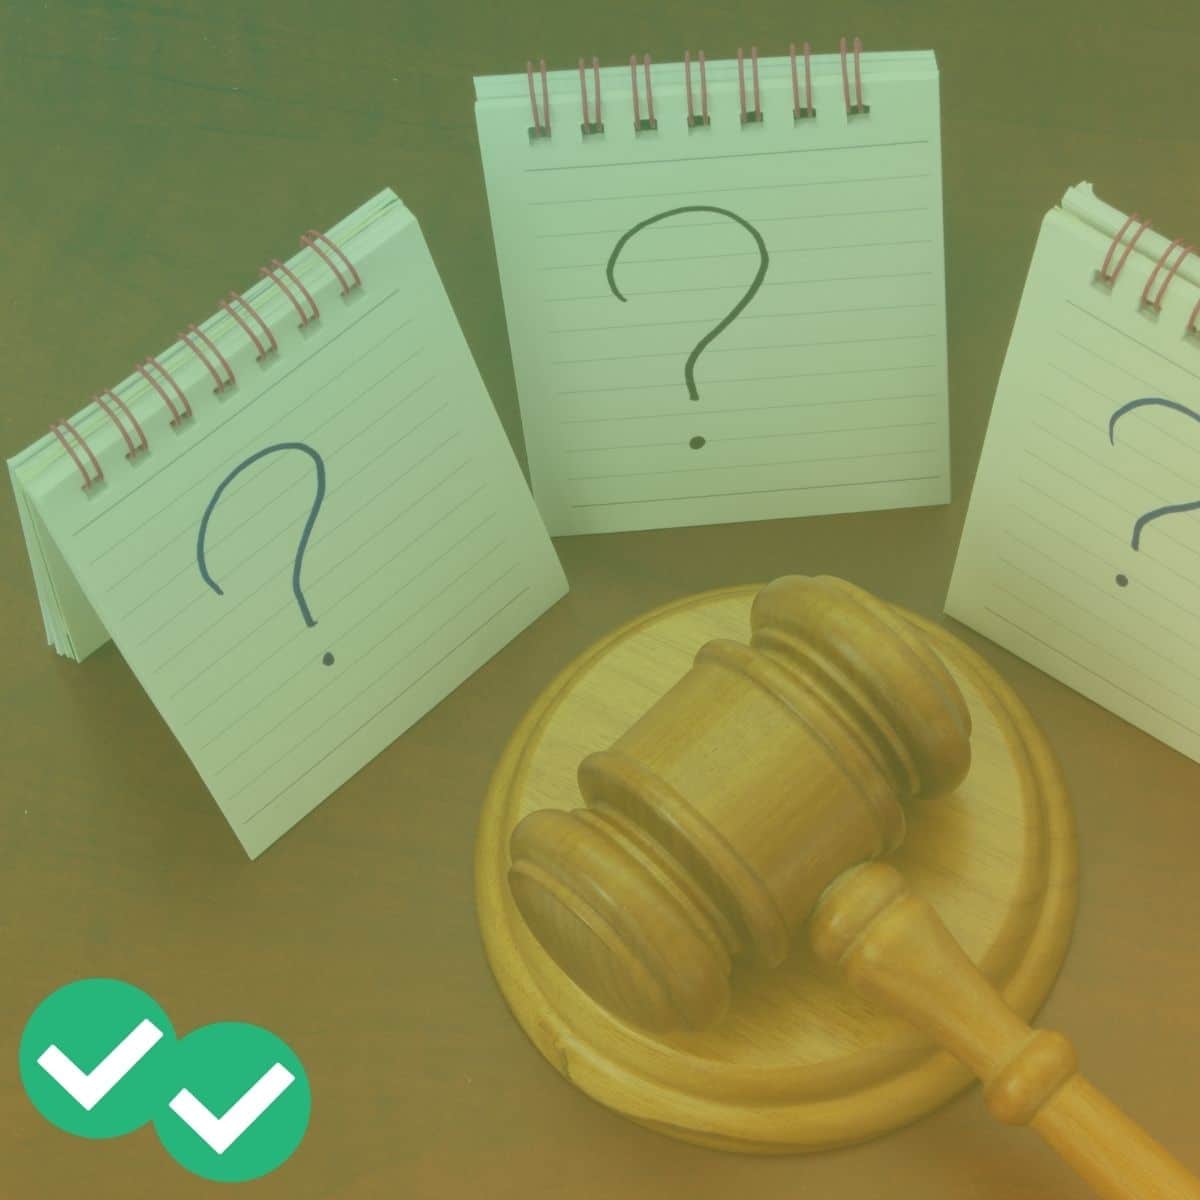 Gavel and cards with question marks indicating LSAT sections - image by Magoosh